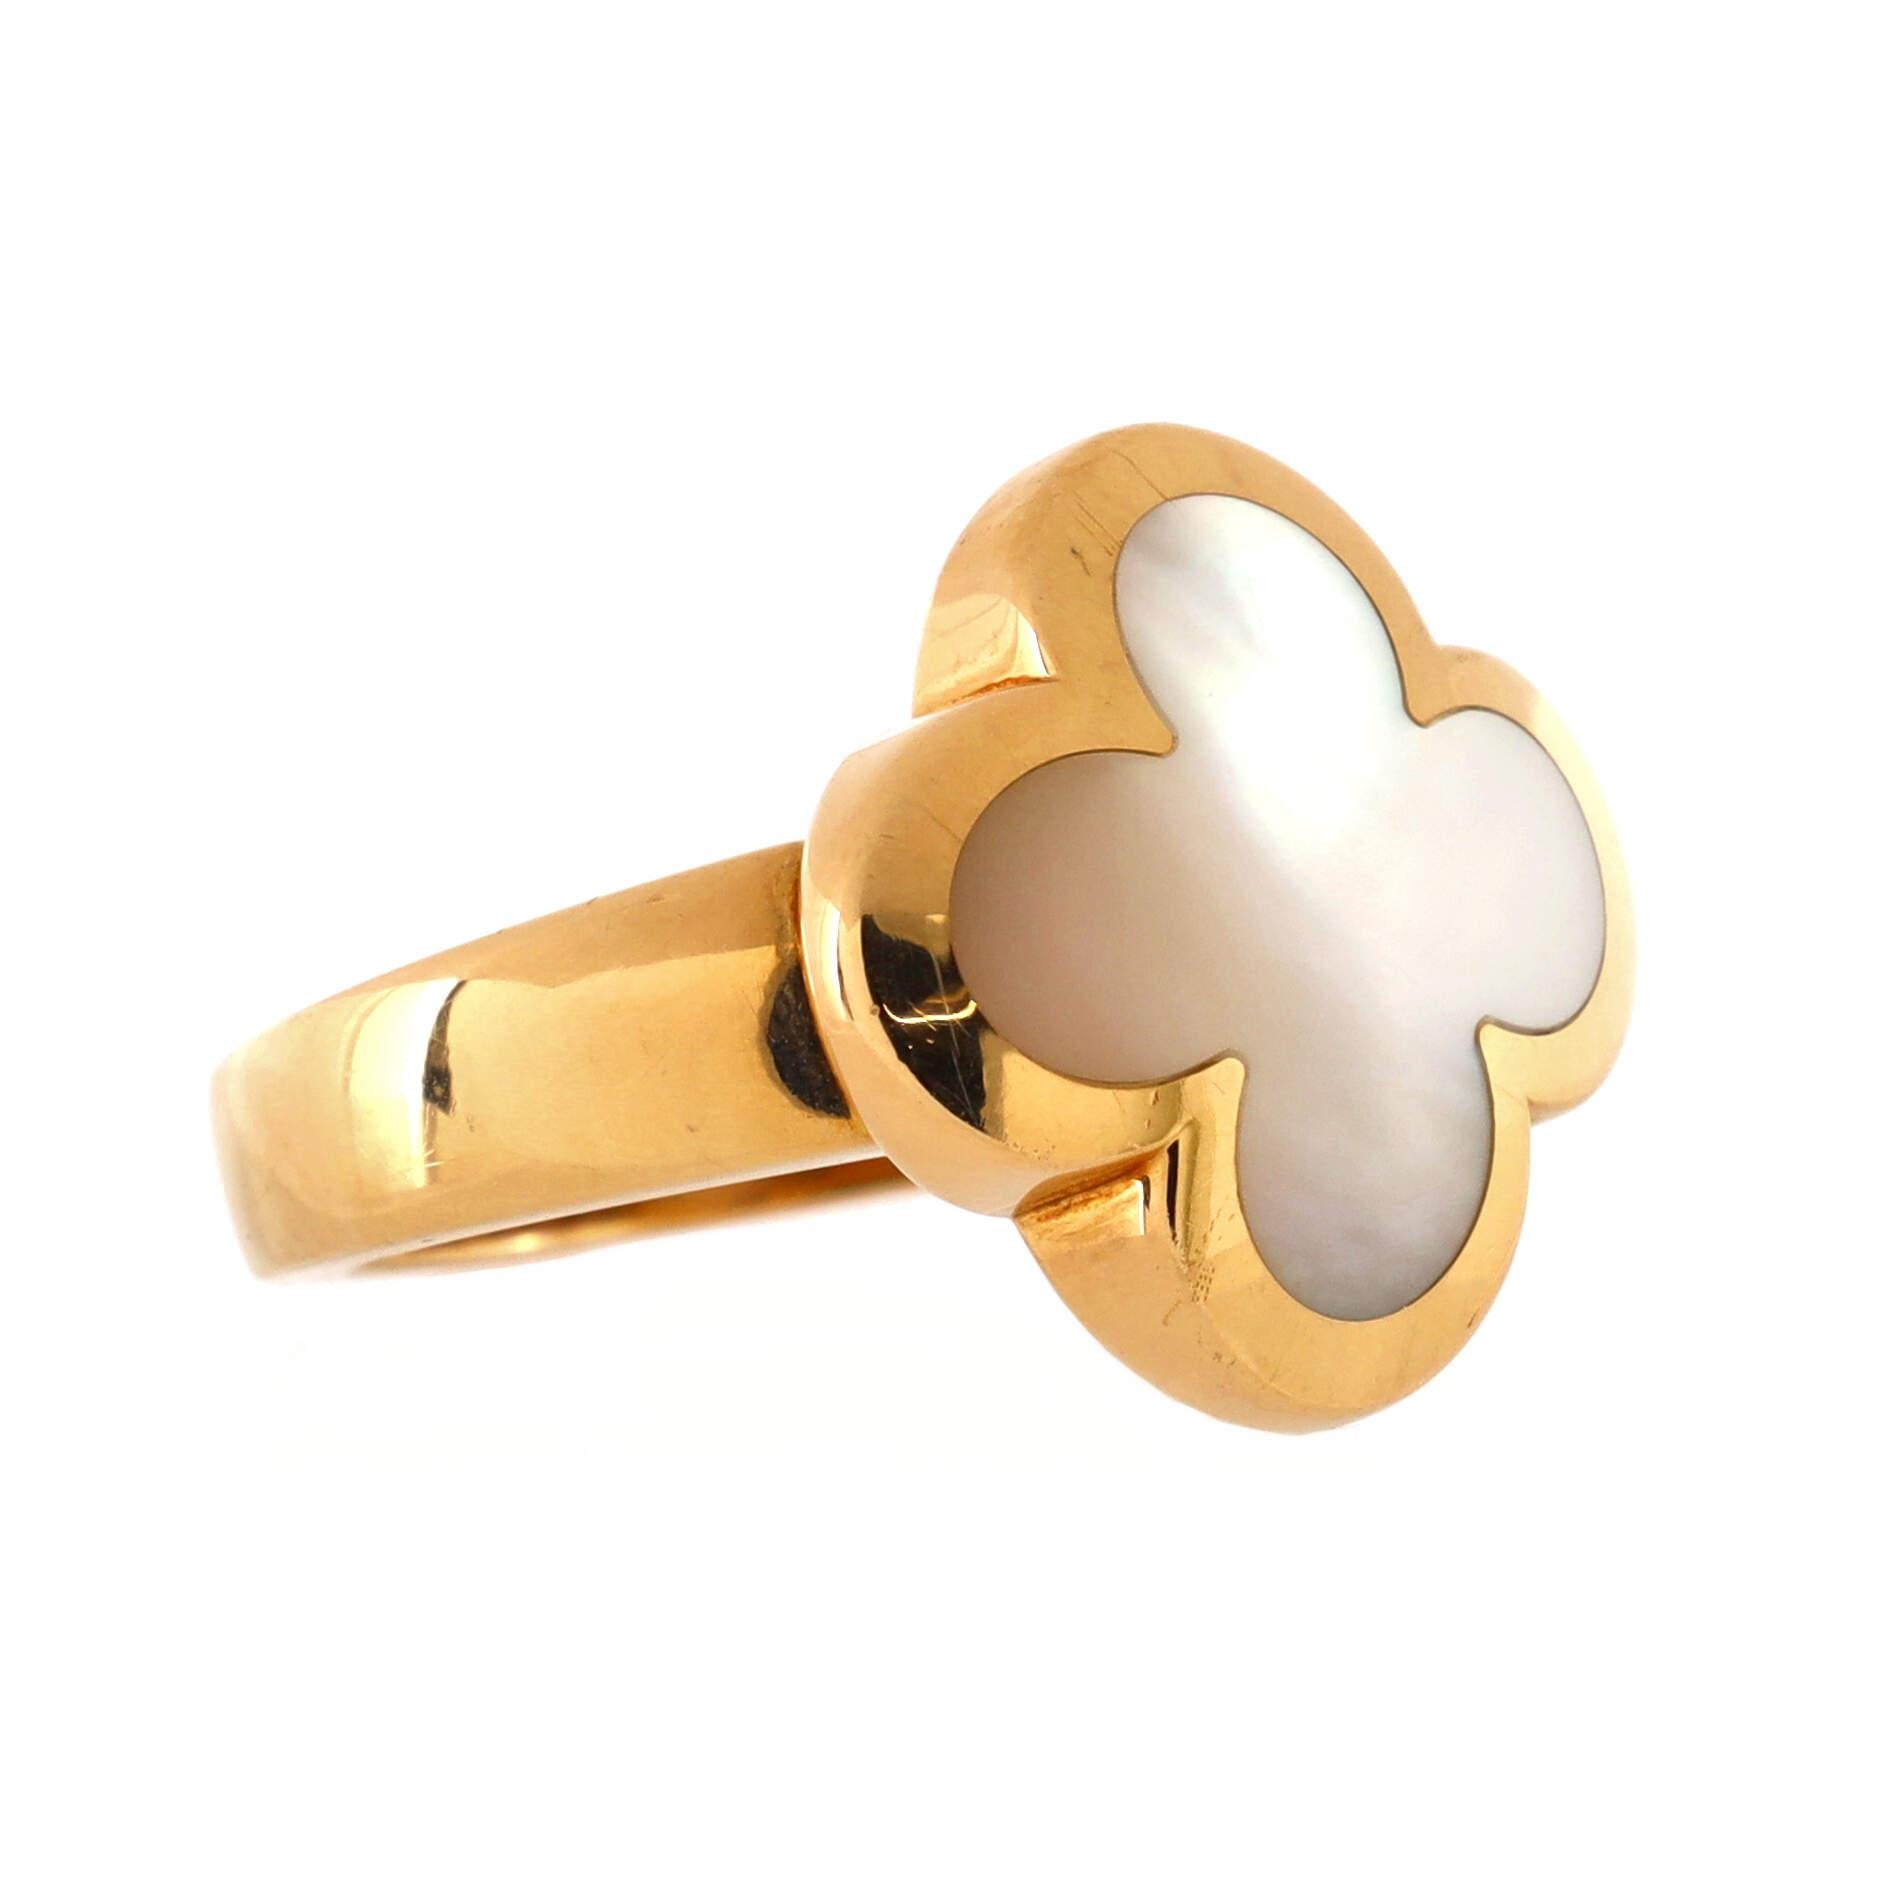 Condition: Very good. Moderate wear throughout with a deep scratch within.
Accessories: No Accessories
Measurements: Size: 5.25 - 50, Width: 3.45 mm
Designer: Van Cleef & Arpels
Model: Pure Alhambra Ring 18K Yellow Gold and Mother of Pearl
Exterior